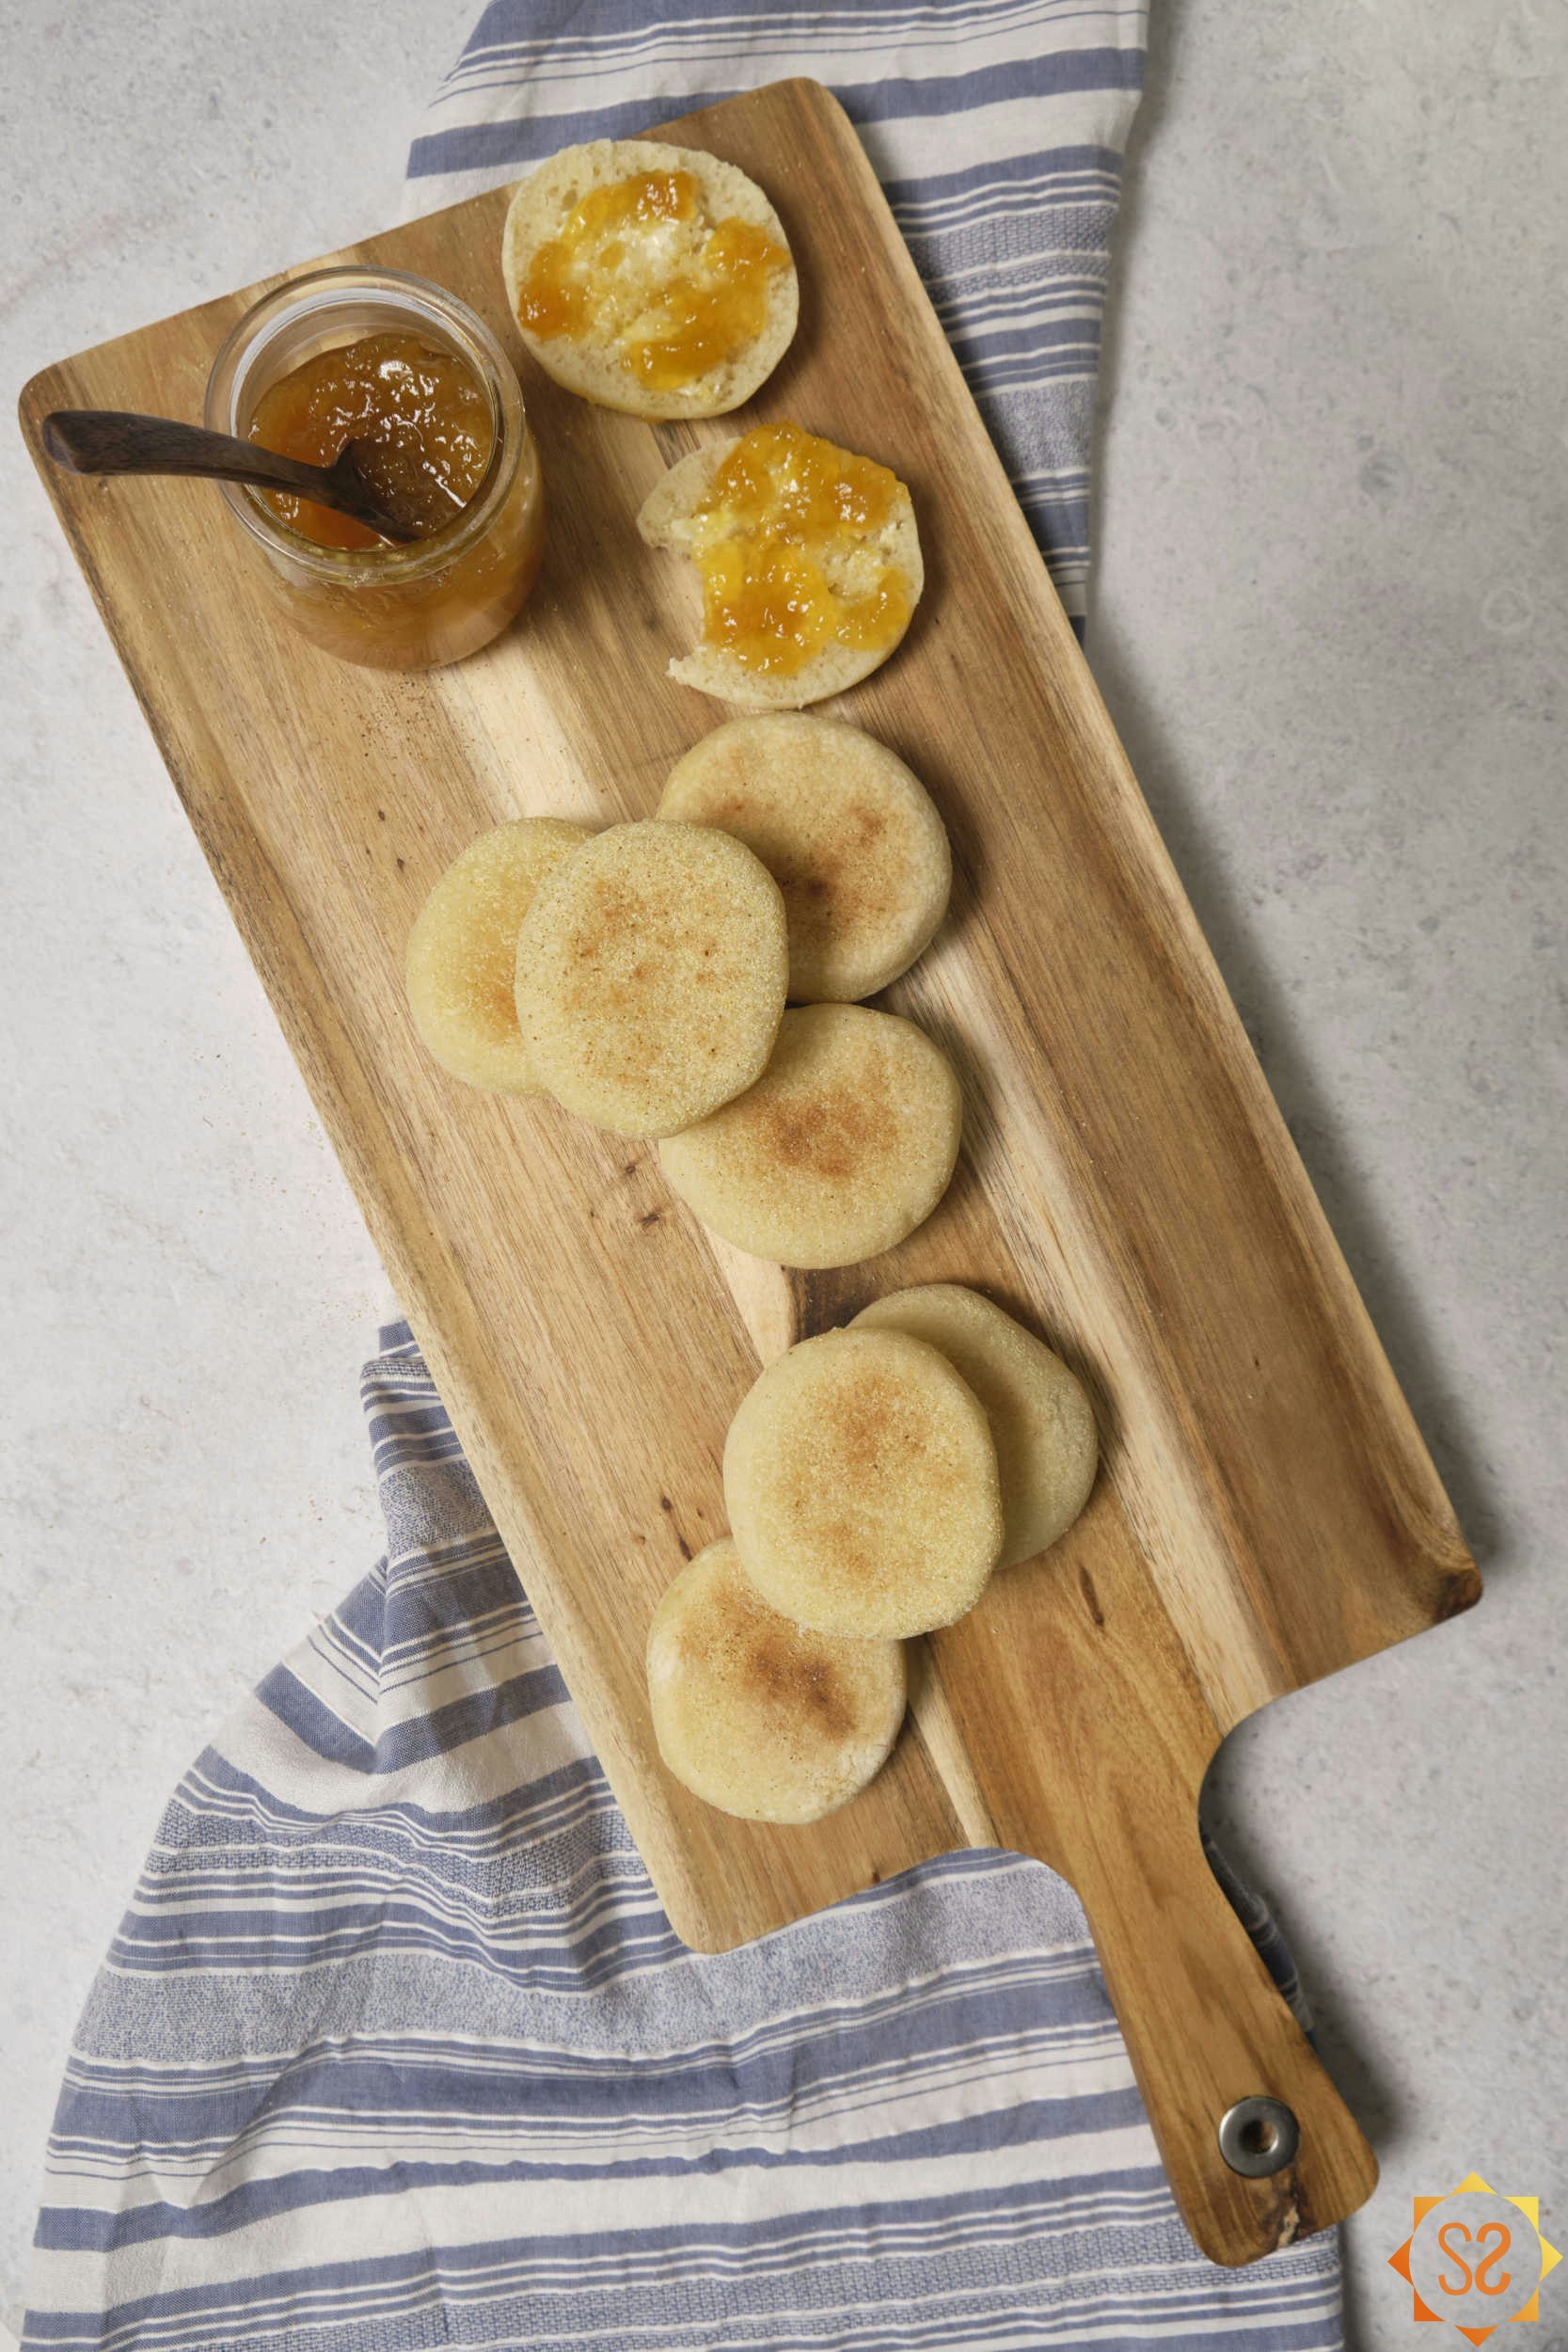 A top down view of English muffins on a serving board, with one at the top sliced open and topped with jelly.